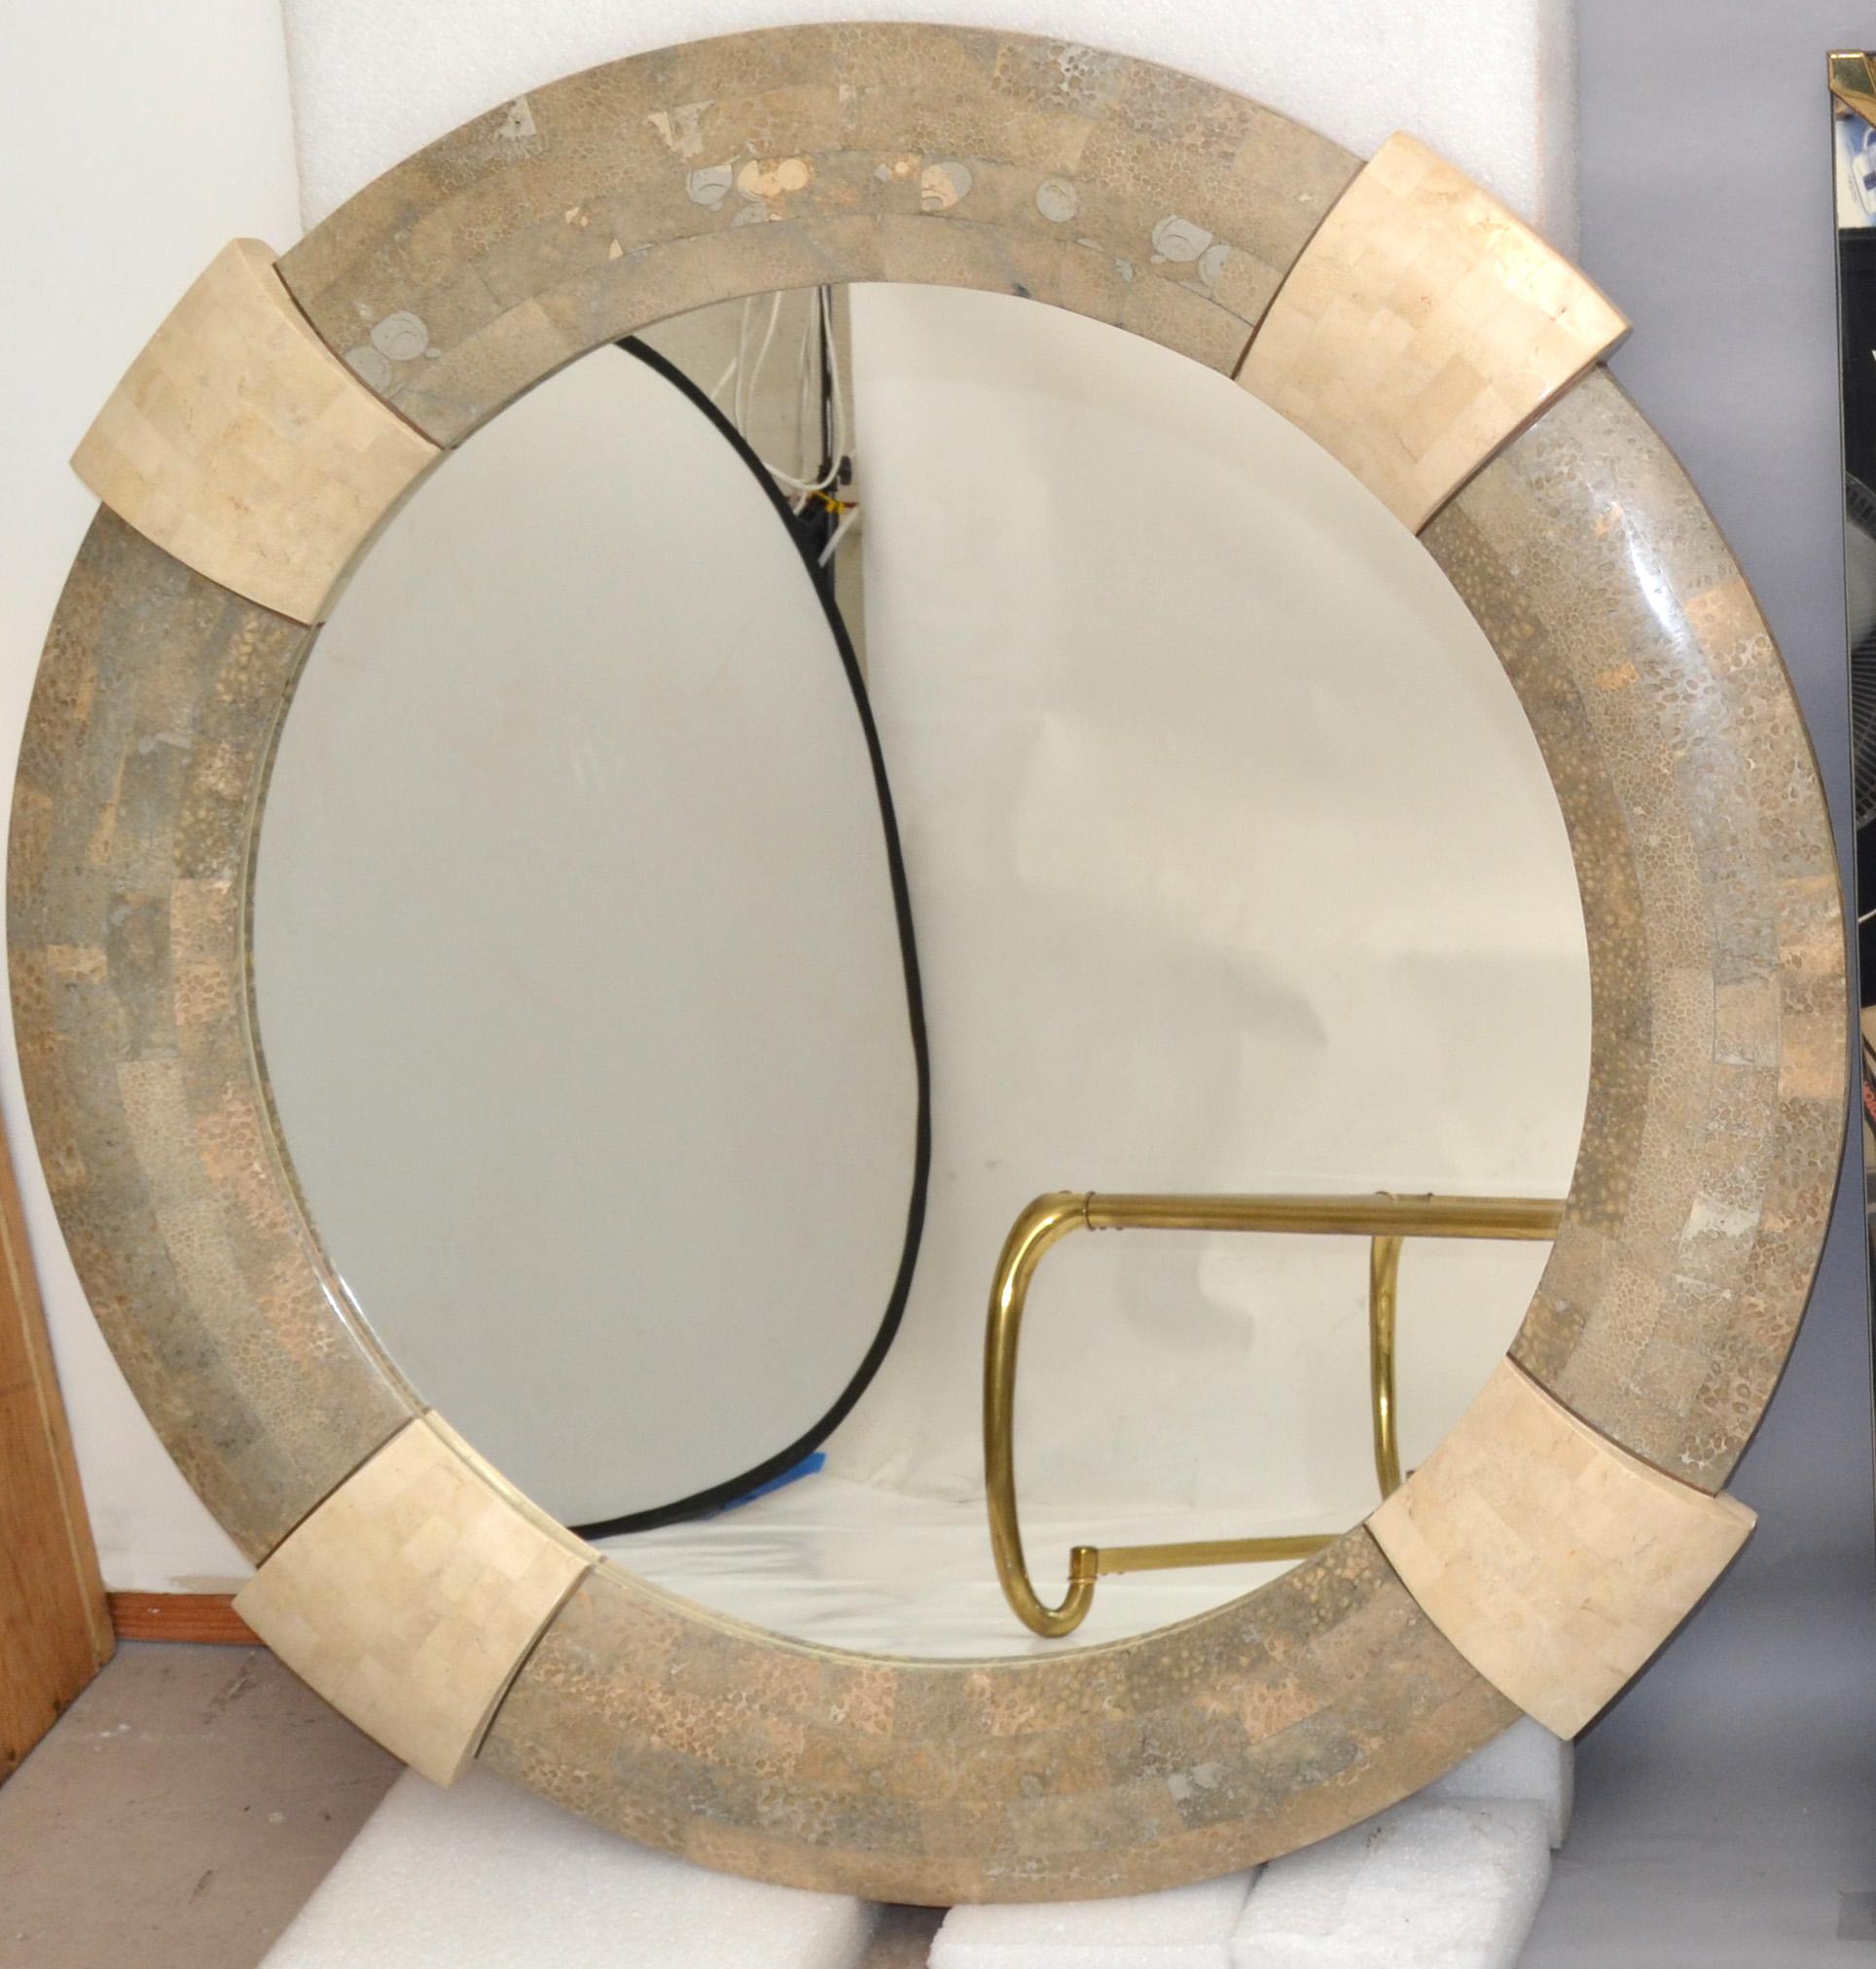 Designed by Robert Marcius for Maitland-Smith Round Tessellated Wall Mirror 1980 In Good Condition For Sale In Miami, FL